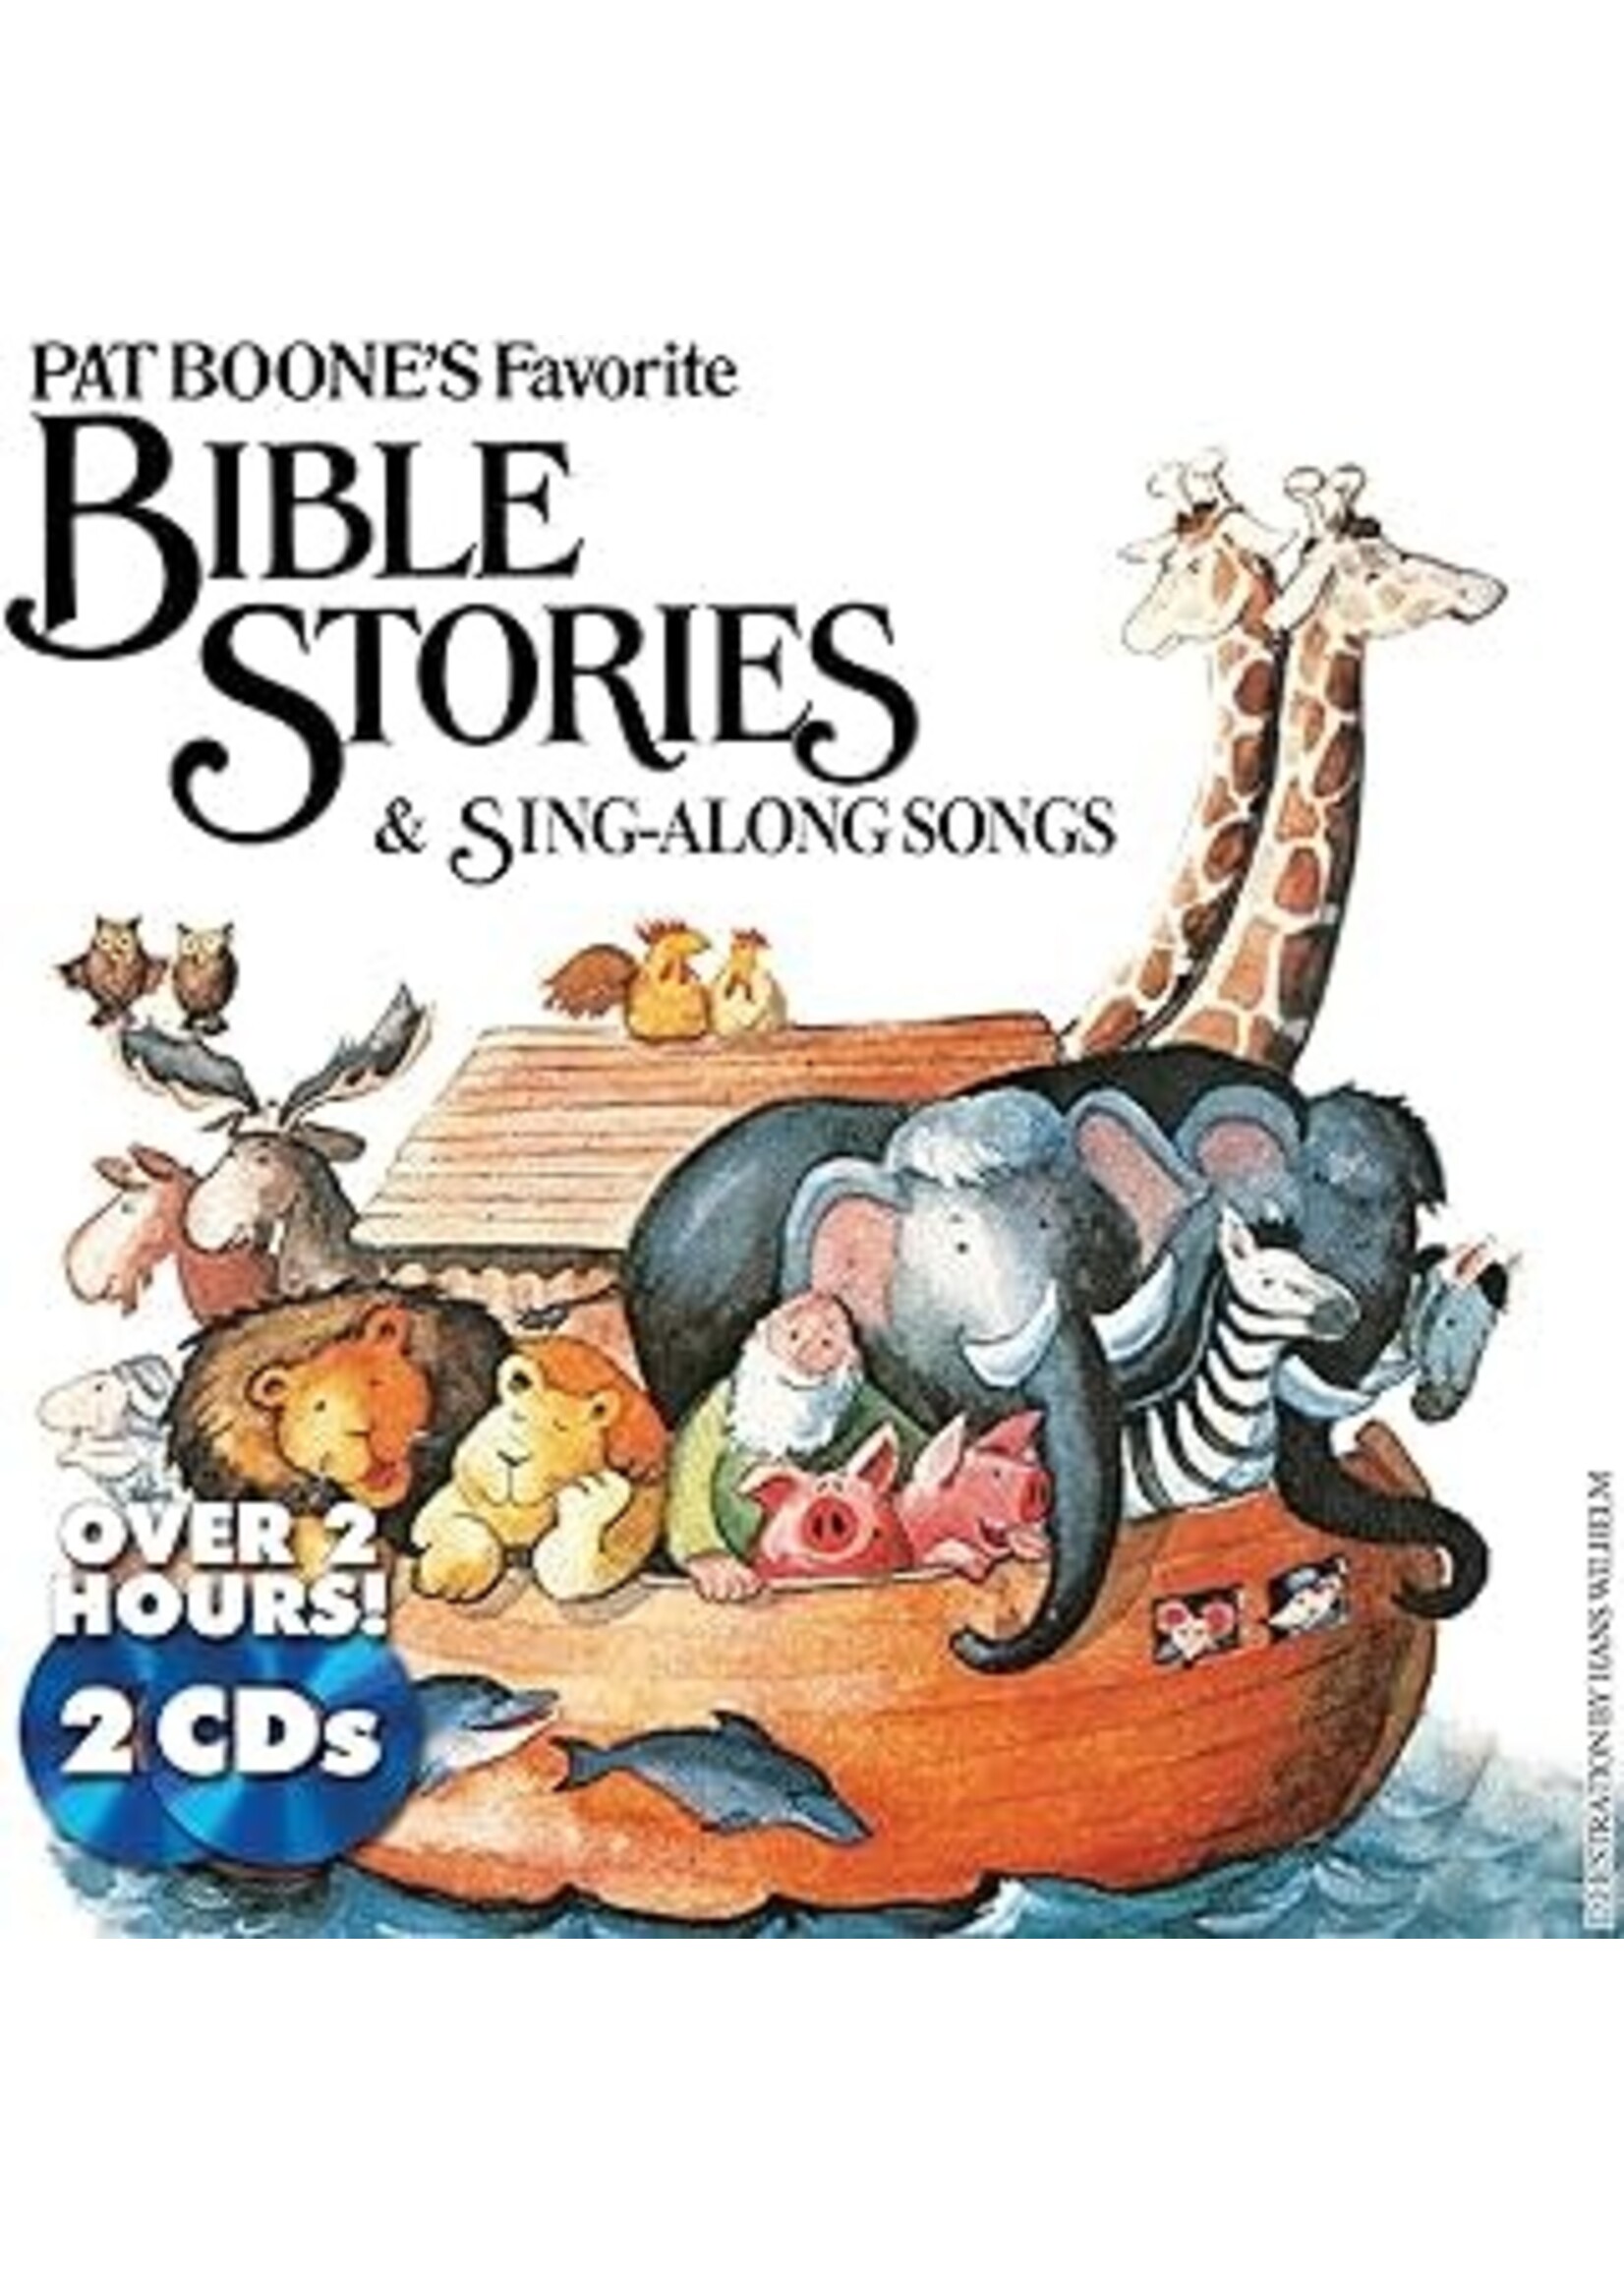 Pat Boone's Favorite Bible Stories and Sing-Along Songs